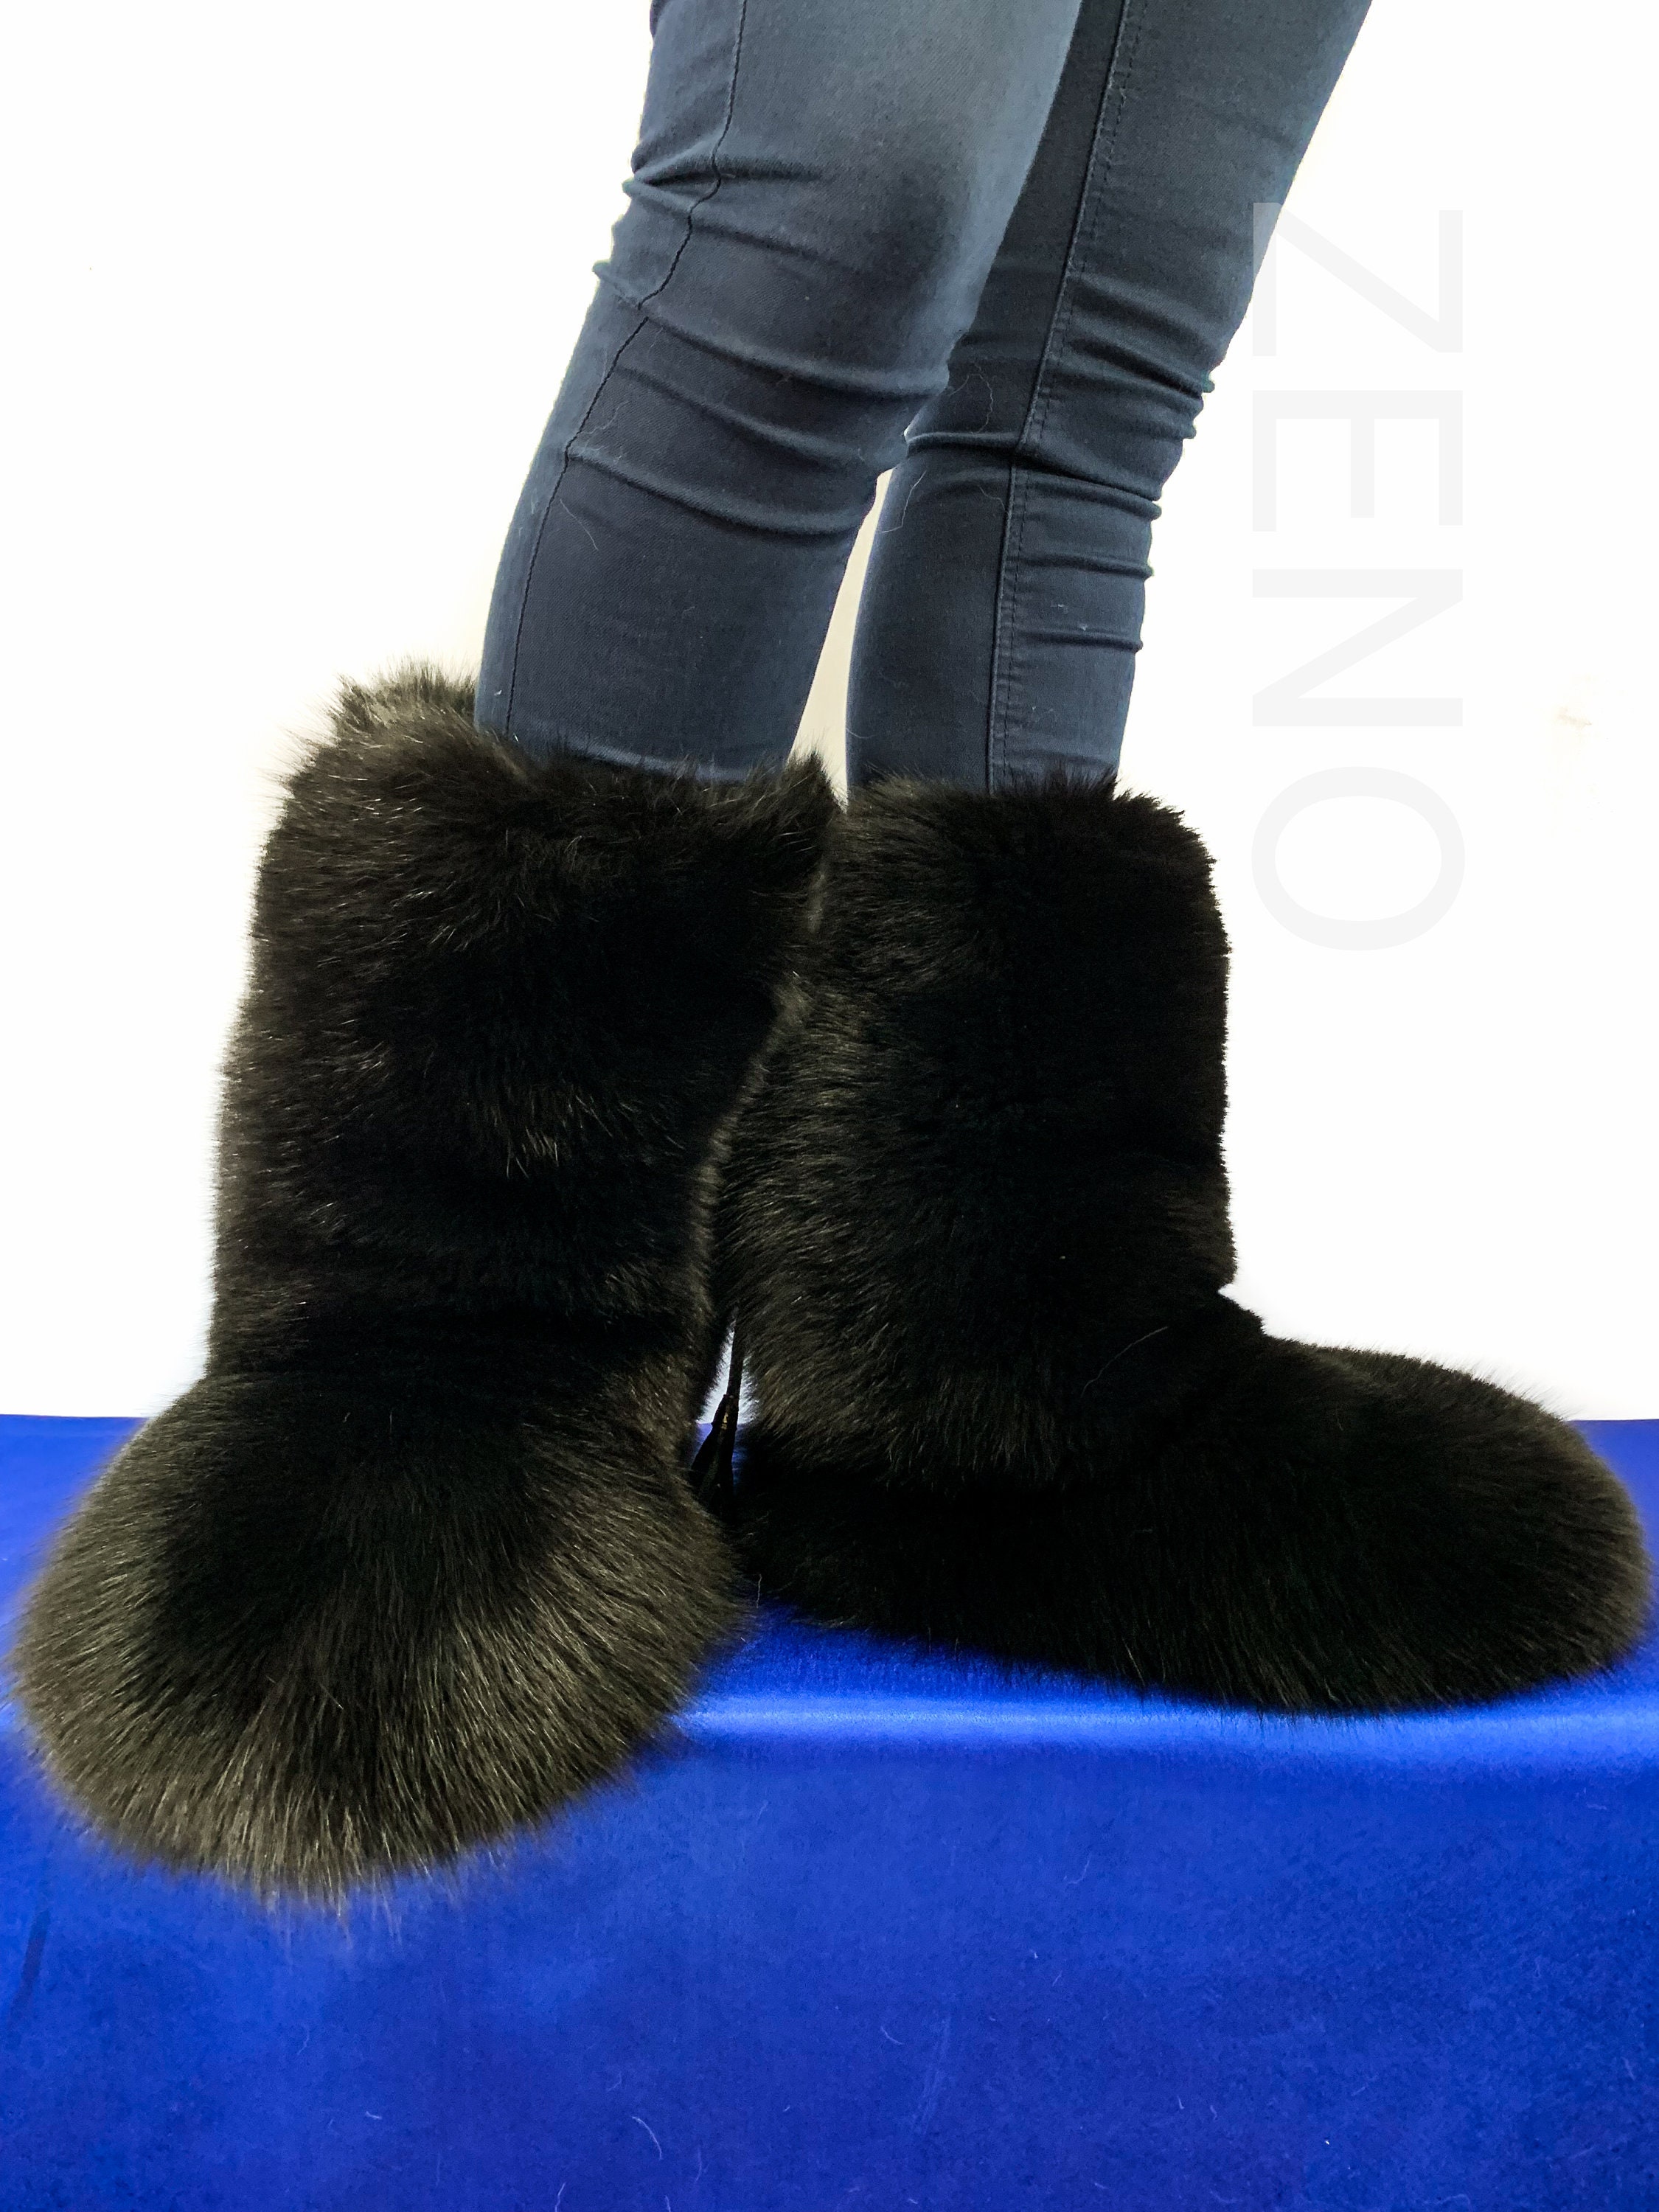 Double-sided Fox Fur Boots for Outdoor Big Foot Boots Jet | Etsy